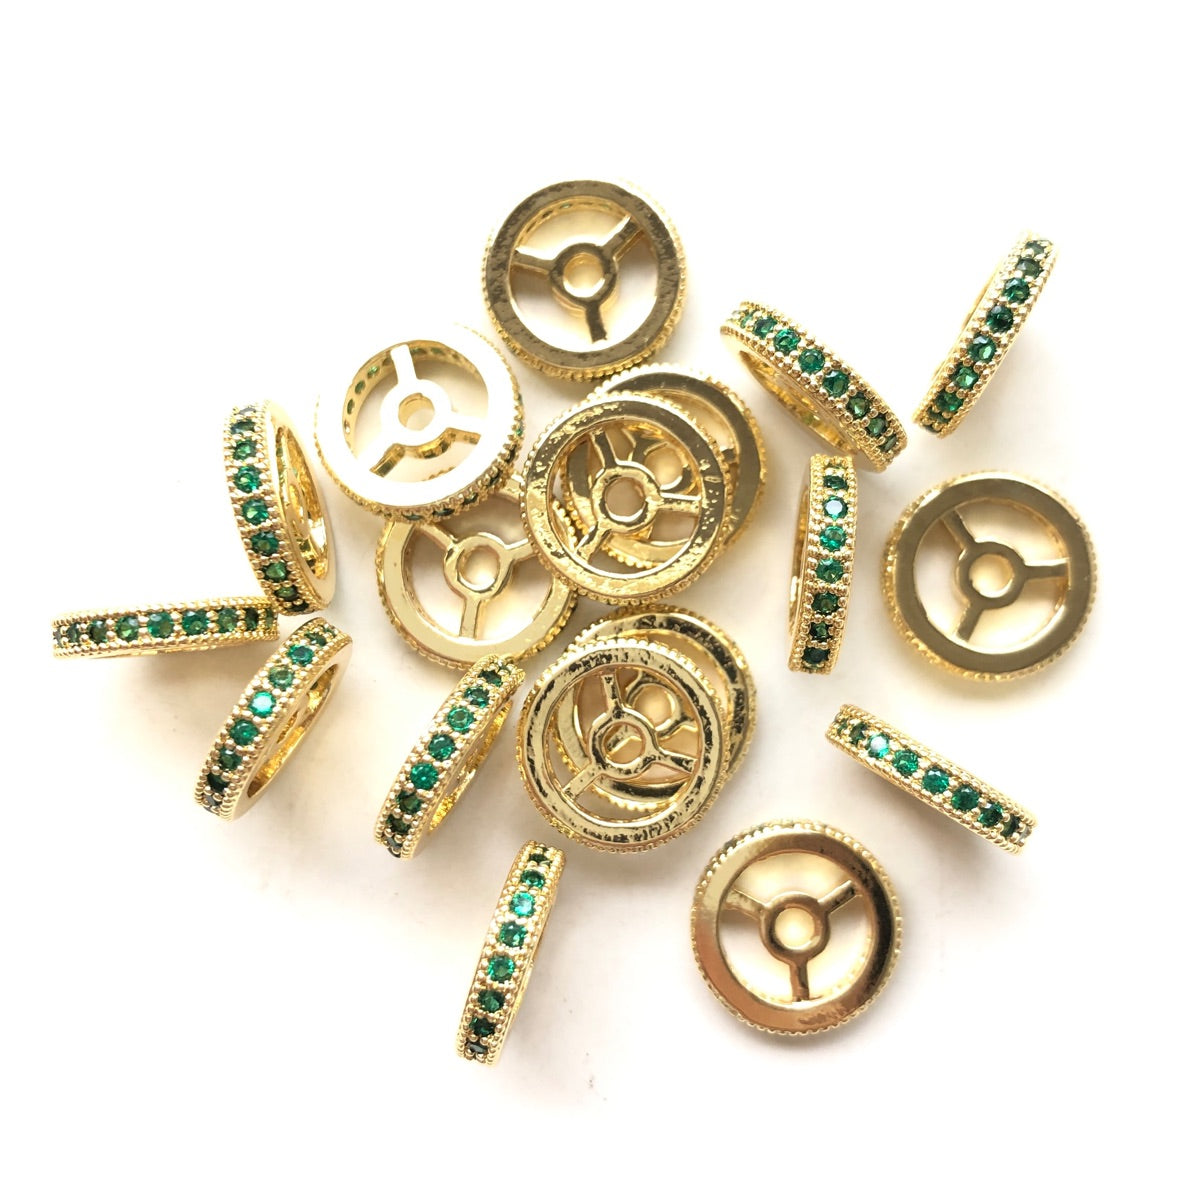 20pcs/lot 9.6/12mm Green CZ Paved Wheel Rondelle Spacers Gold CZ Paved Spacers New Spacers Arrivals Rondelle Beads Charms Beads Beyond